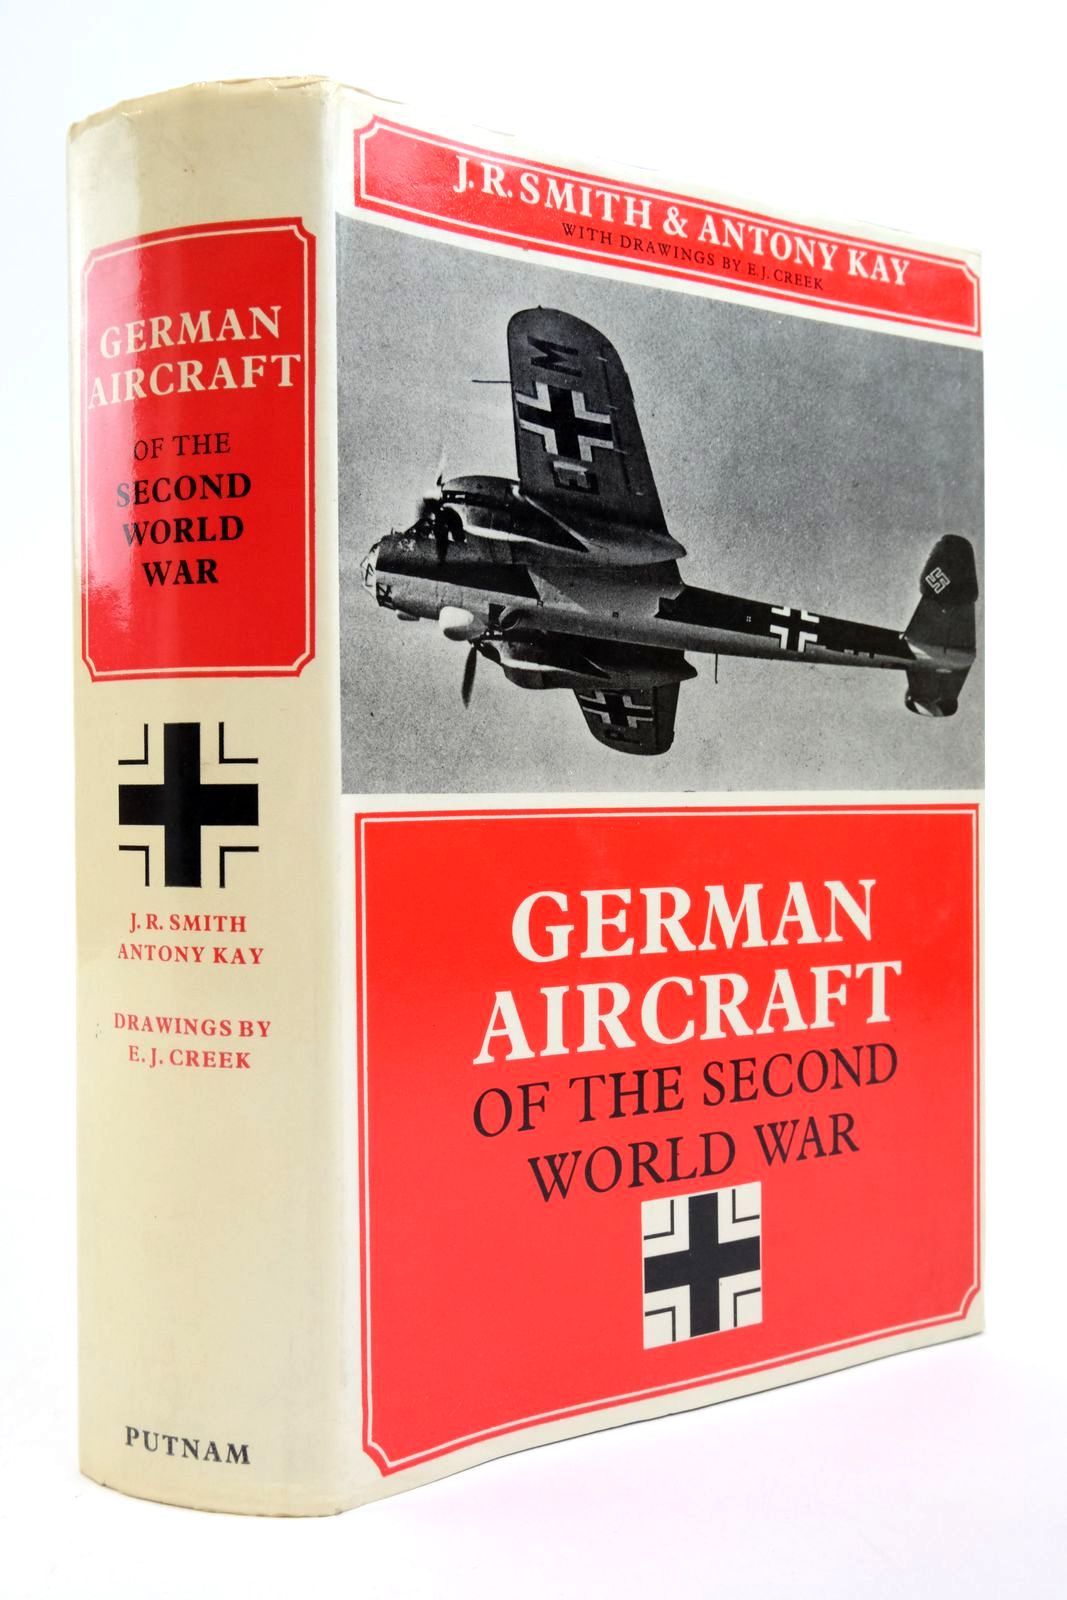 Photo of GERMAN AIRCRAFT OF THE SECOND WORLD WAR written by Smith, J.R. Kay, Antony L. published by Putnam (STOCK CODE: 2138495)  for sale by Stella & Rose's Books